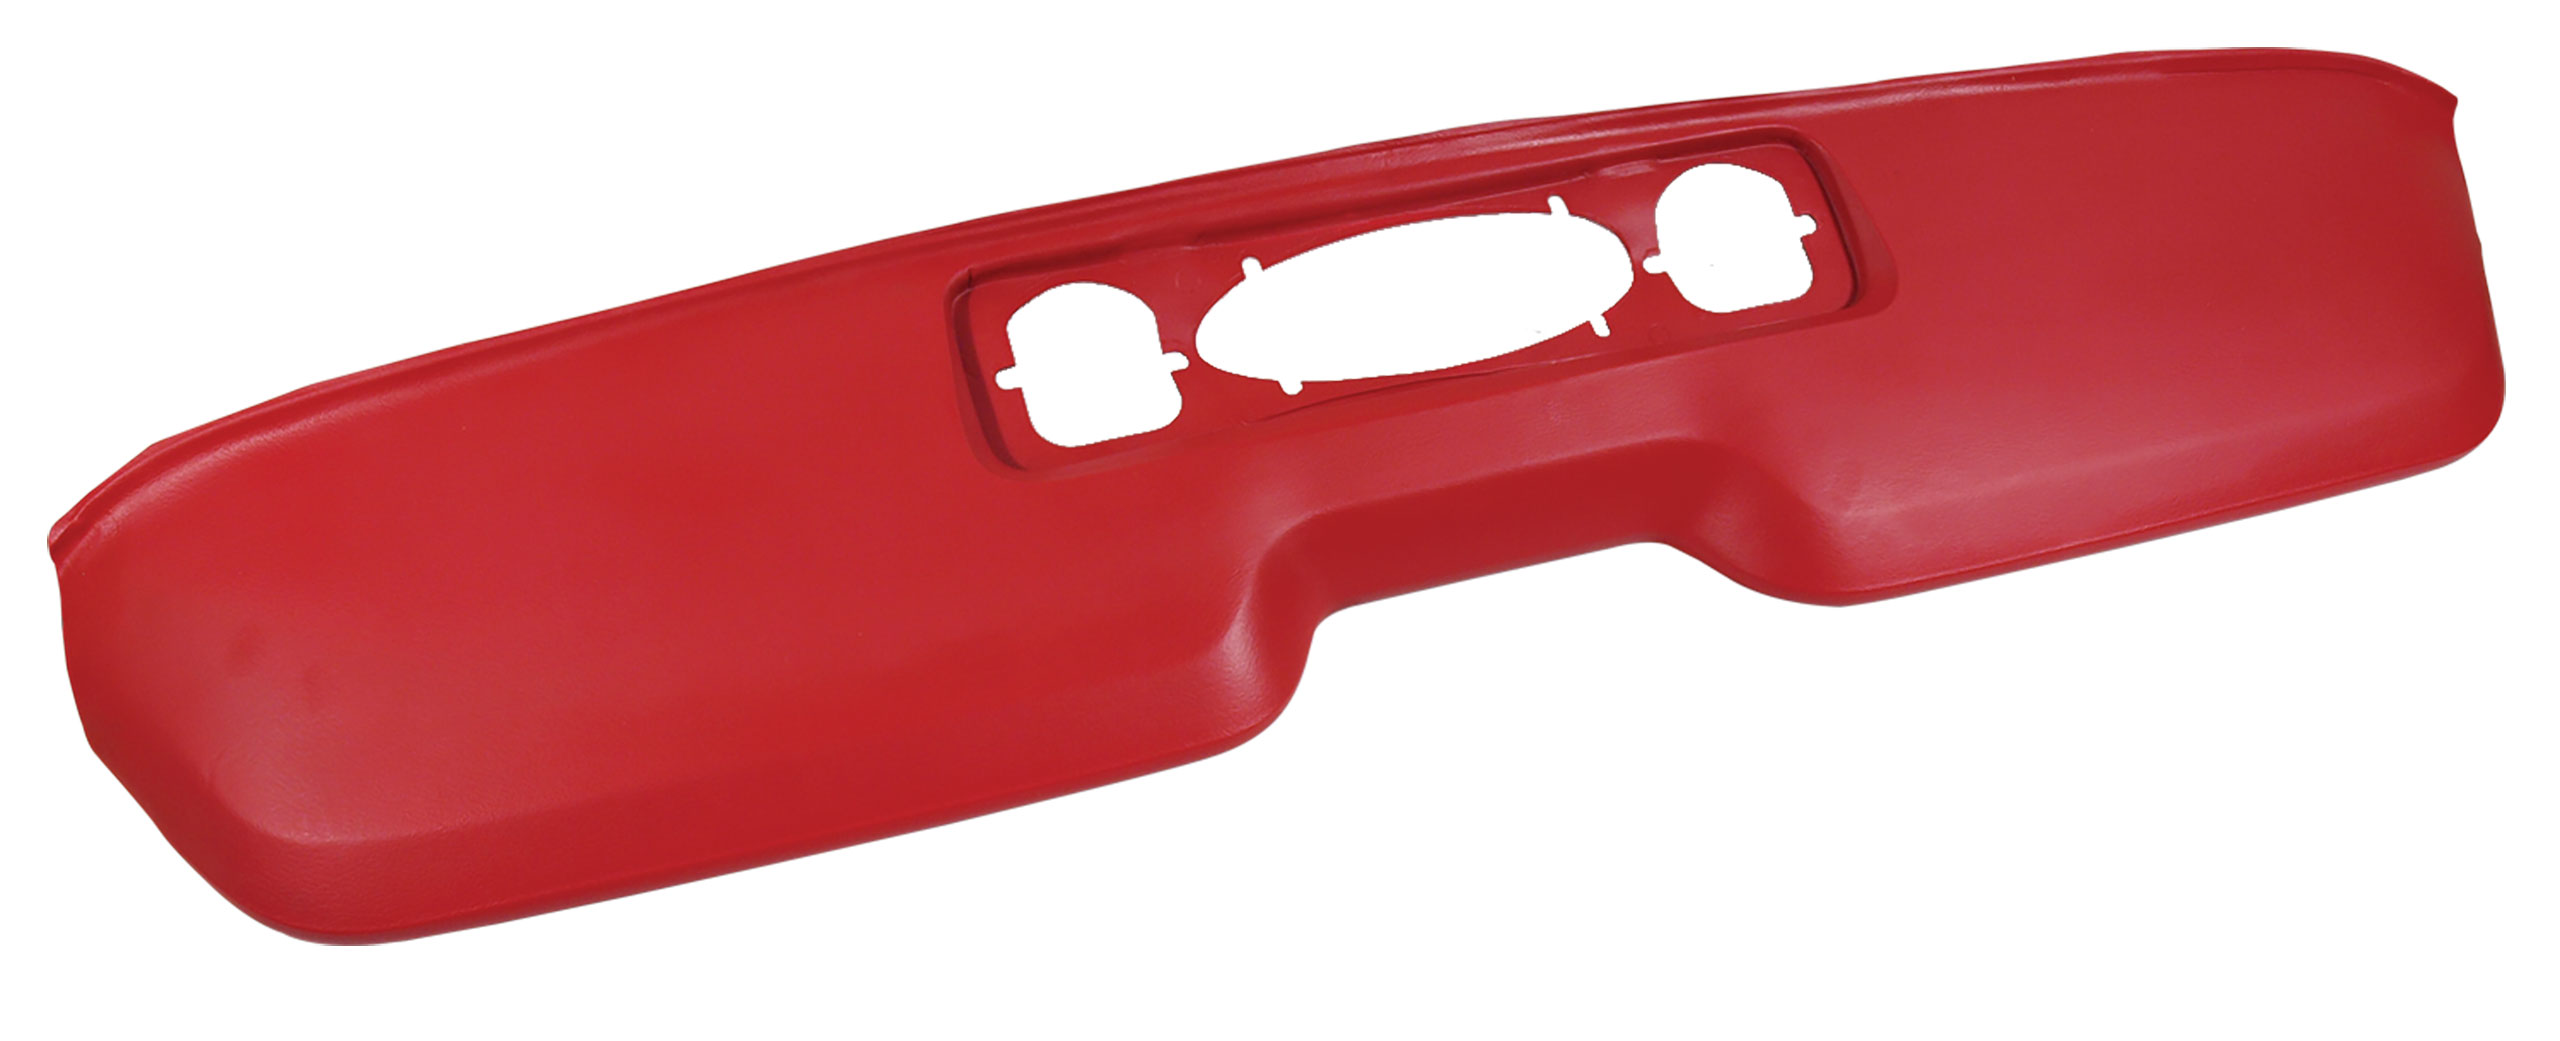 1964-1965 Ford Mustang Dash Pad - Red - Urethane